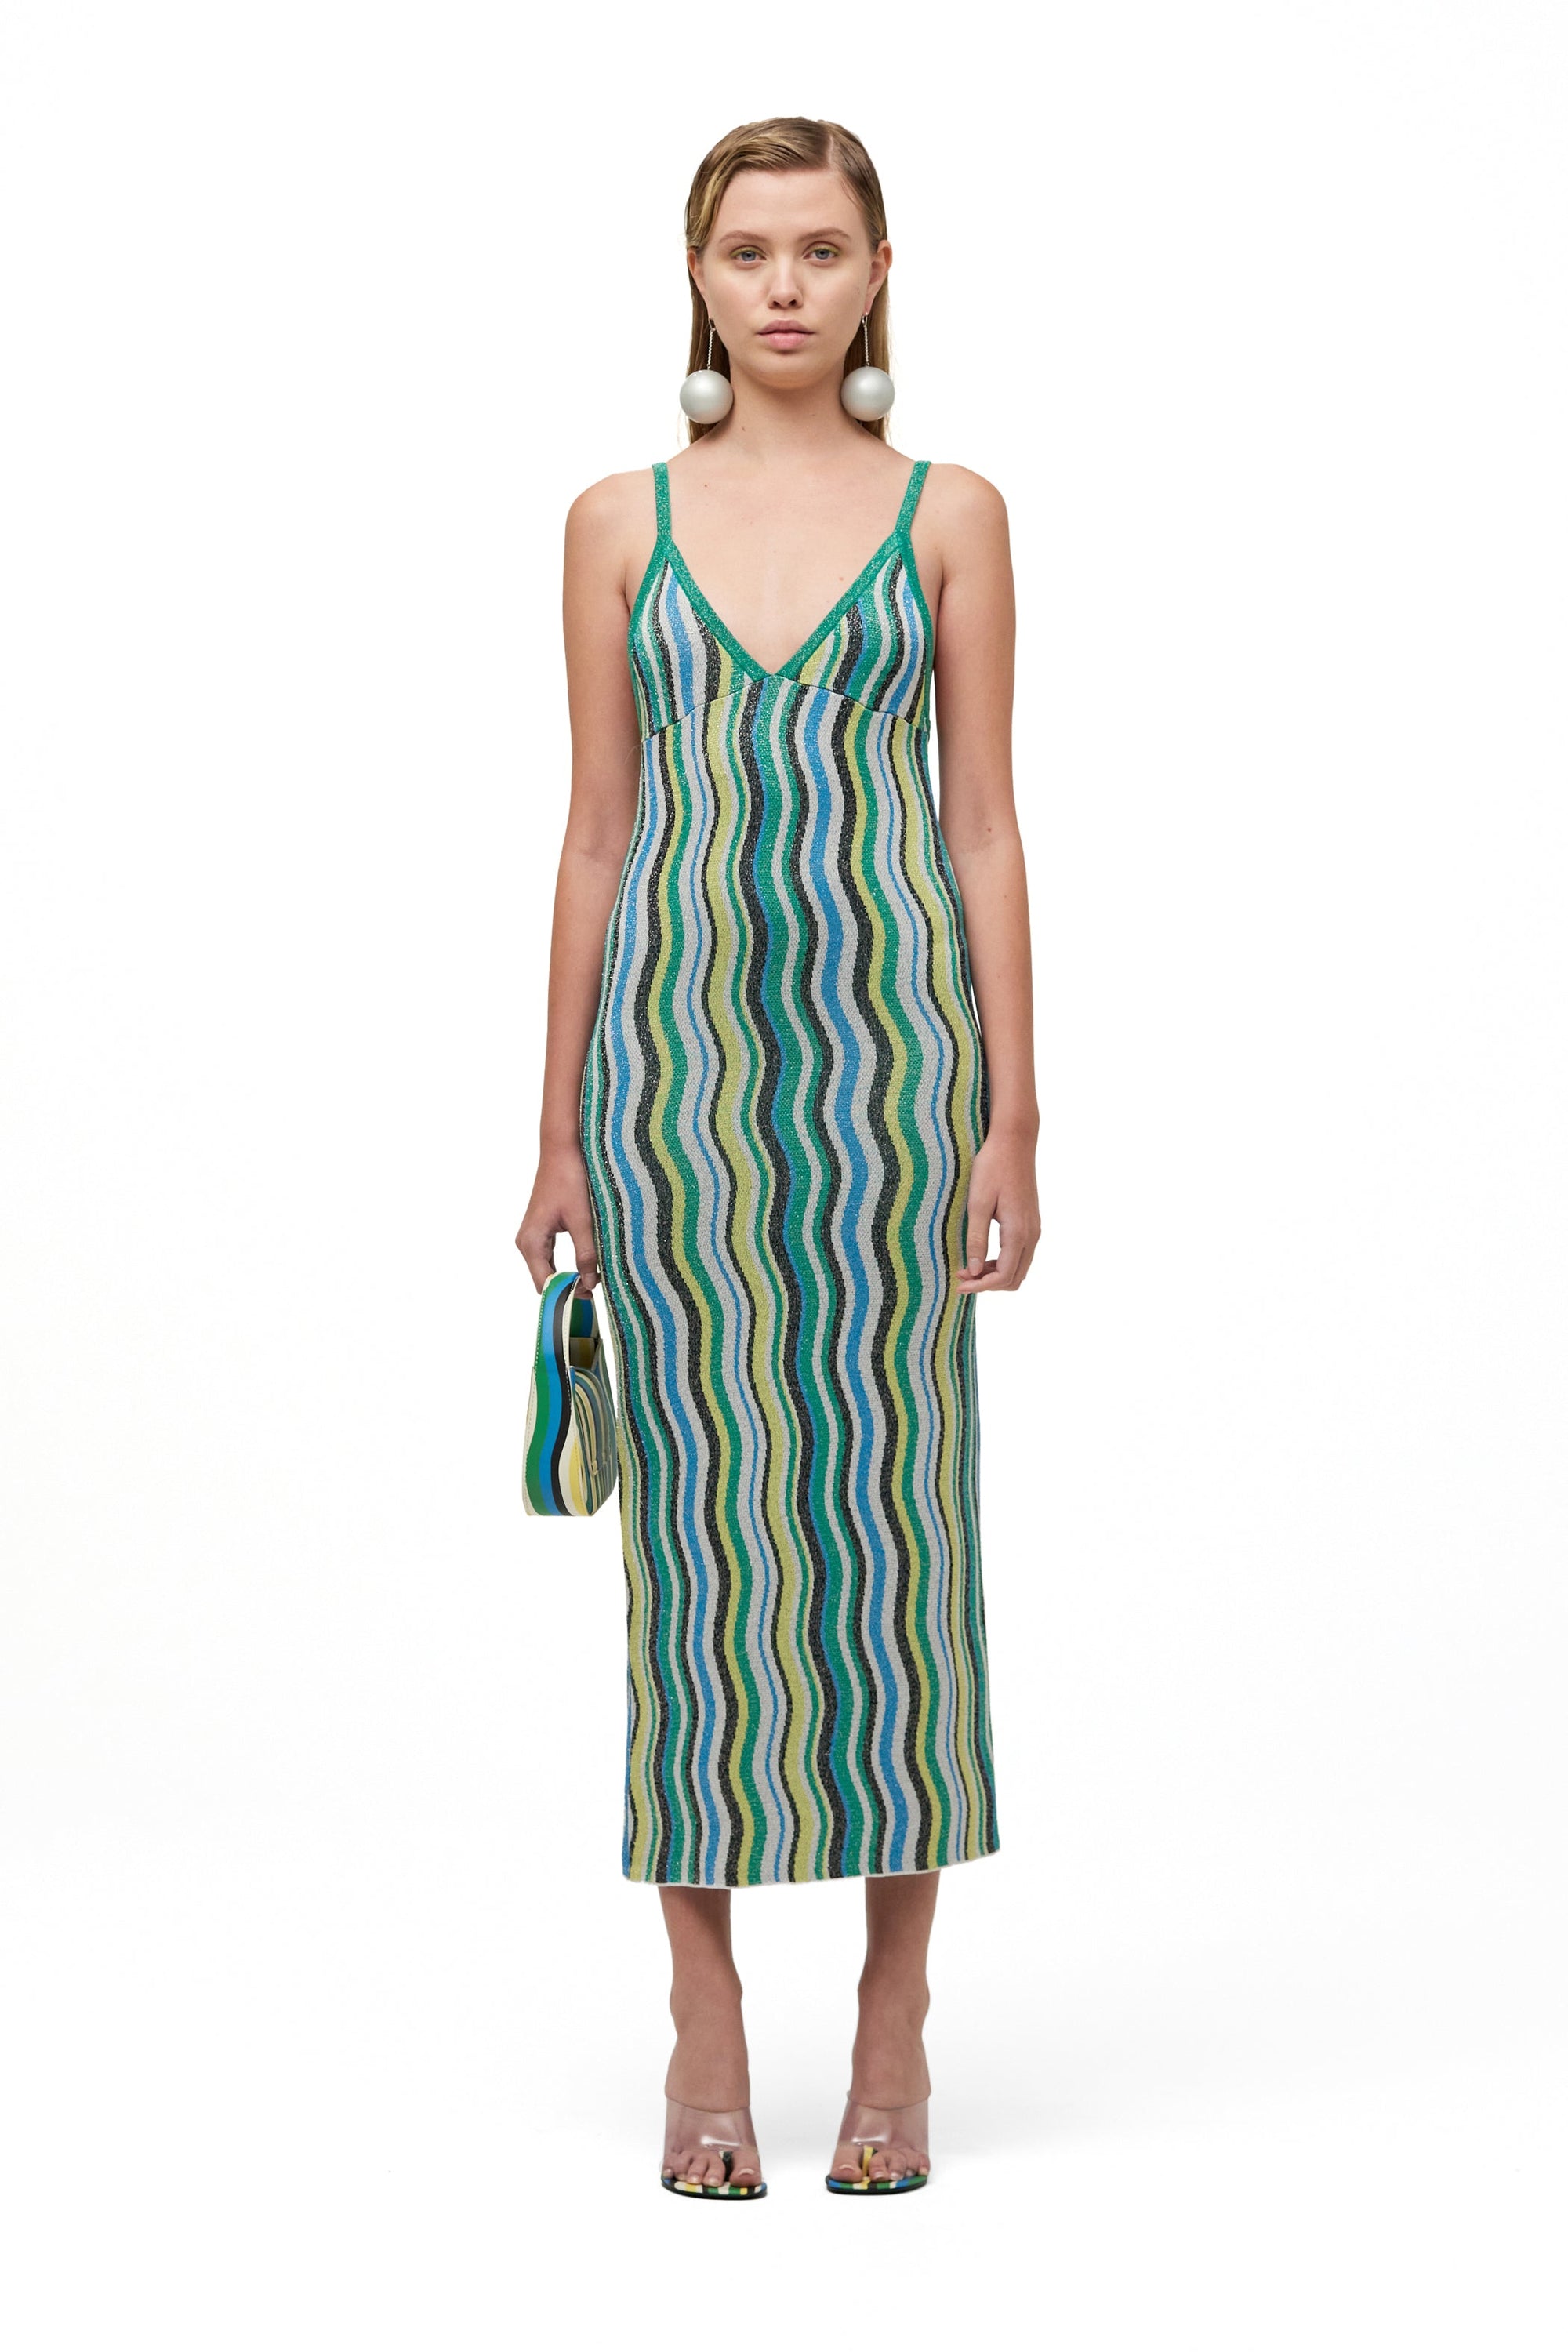 Comet Dress in Candy Swirl by Simon Miller